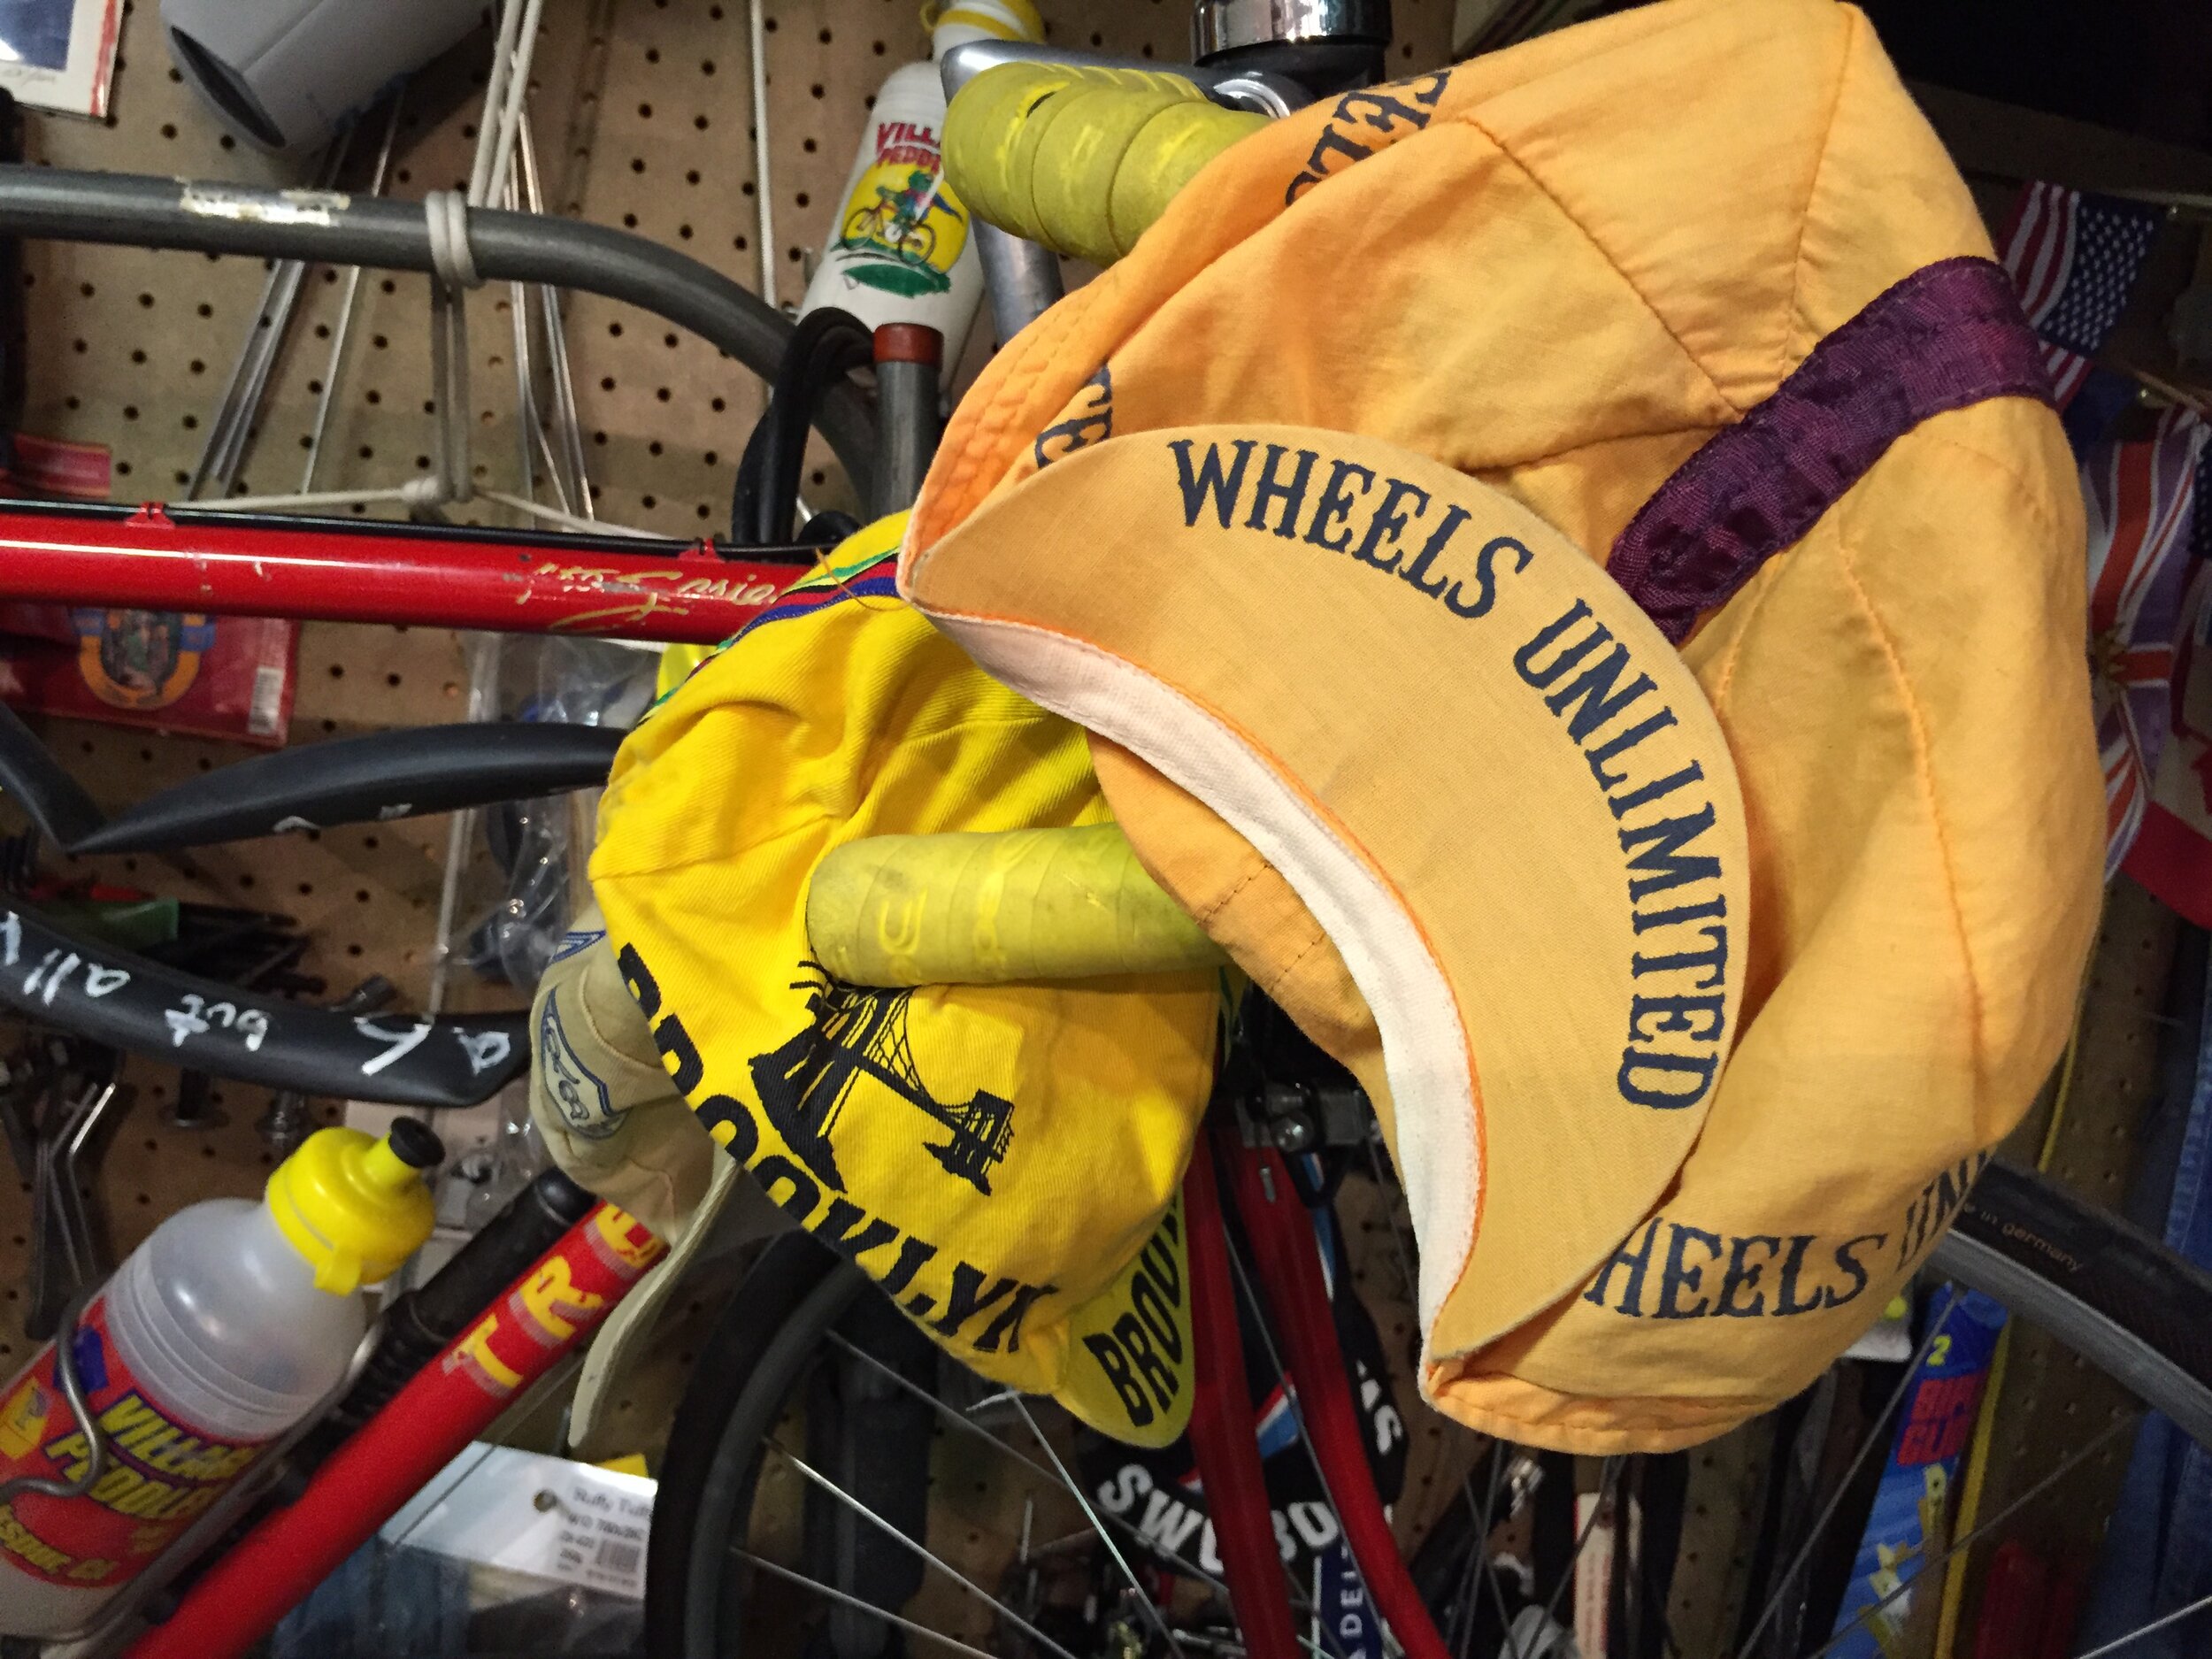  Wheels Unlimited was my first Bike shop in Marin.  It was in San Rafael along my work commute.  The owner got mugged in San Francisco, never fully recovered &amp; had to close shop. For those who viewed Volumes I &amp; II, the TREK is on a bike rack